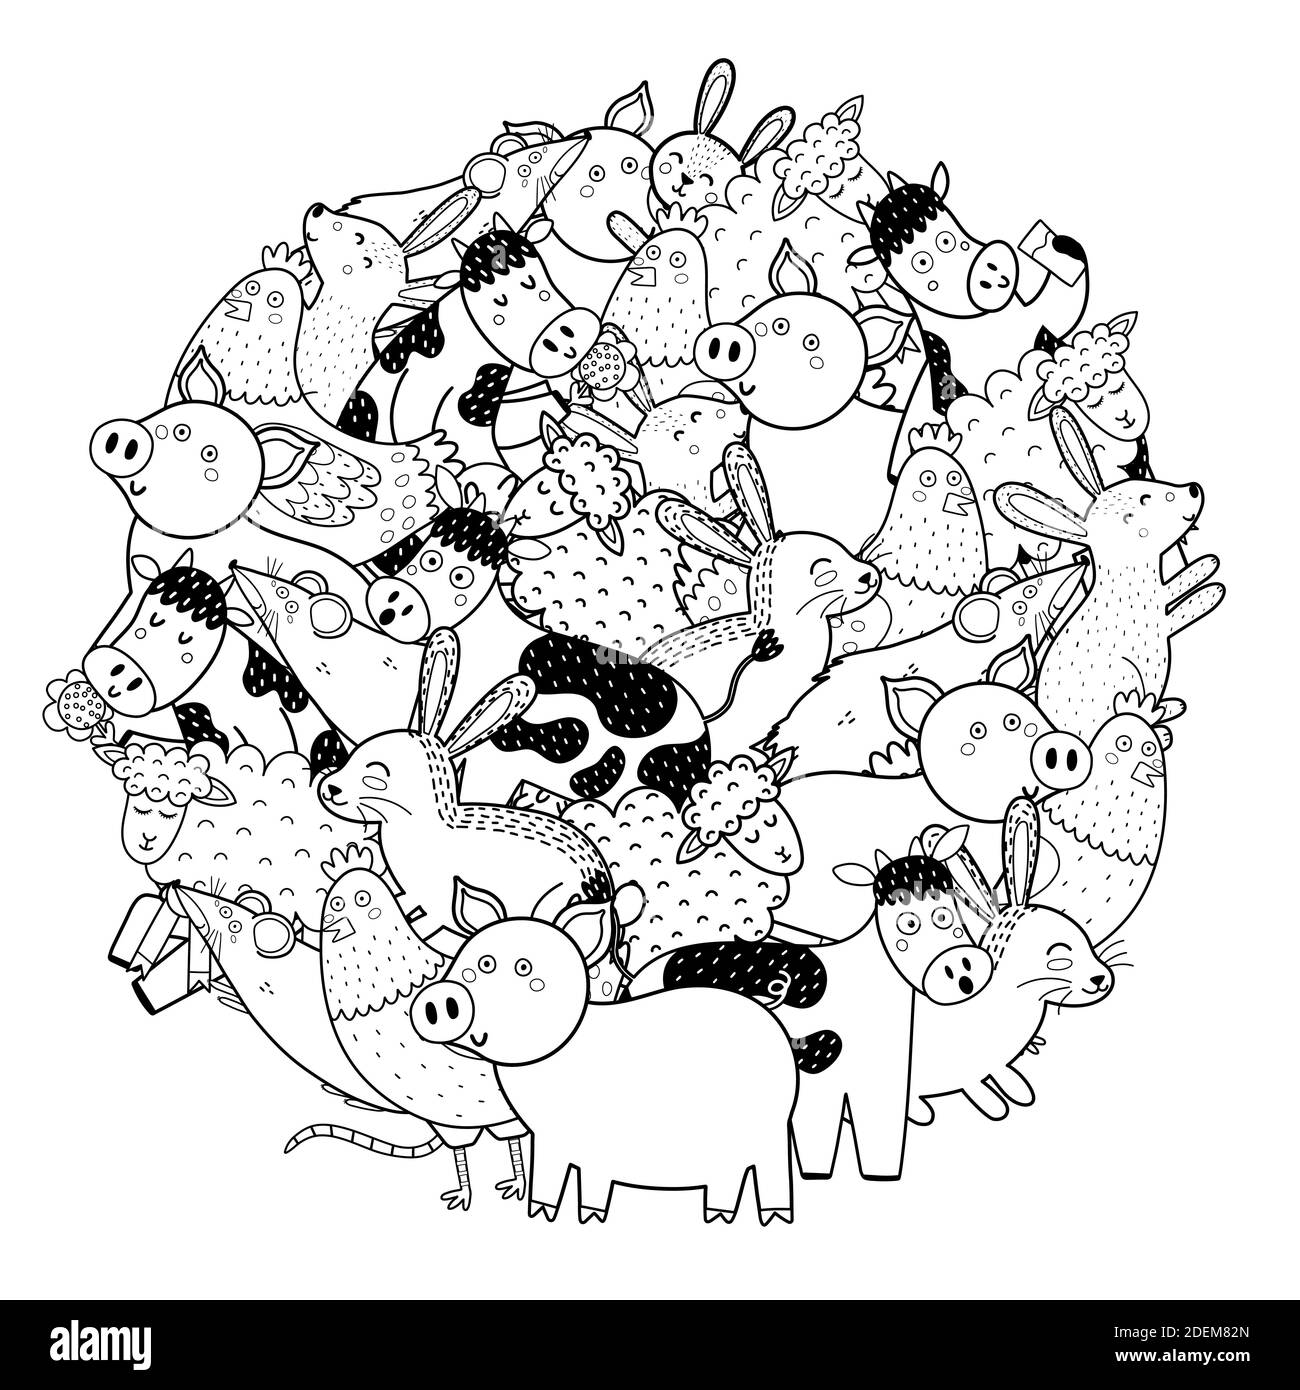 Circle shape coloring page with funny farm characters. Cute animals black and white print Stock Vector